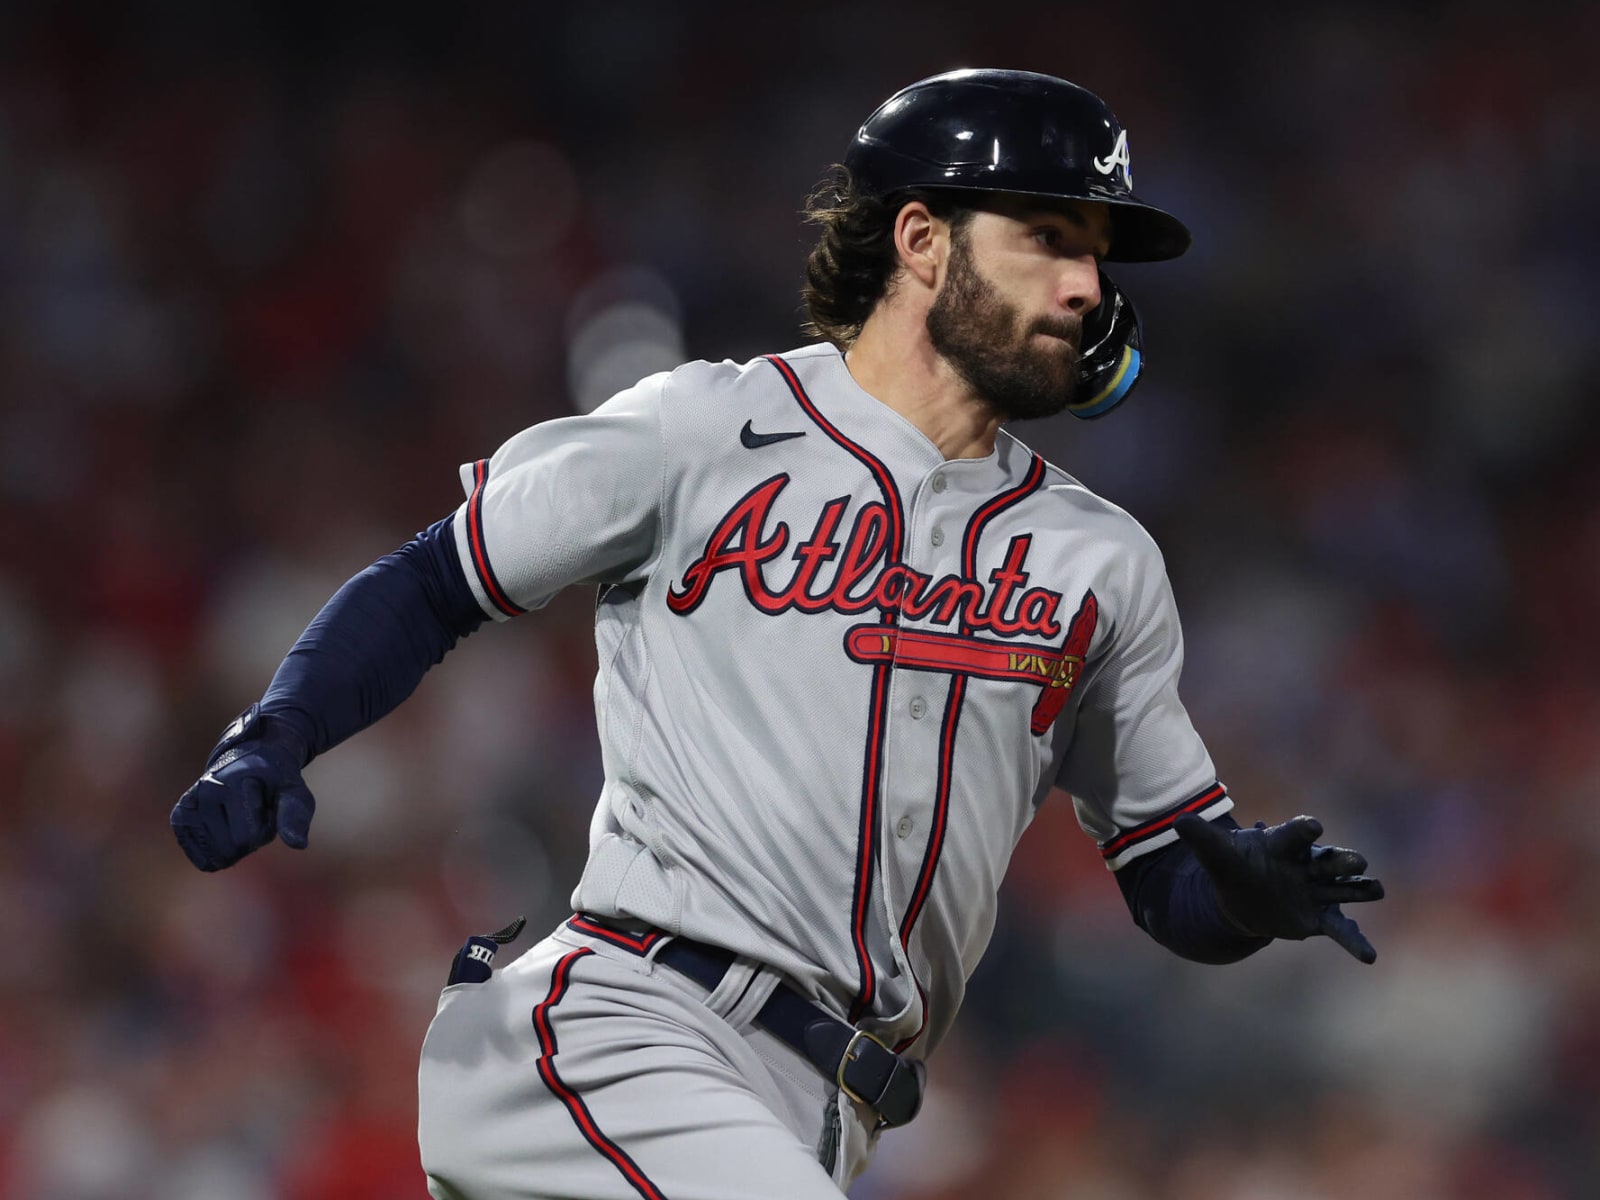 Atlanta Braves coach believes Dansby Swanson's replacement is ready to take  the position: I really have a lot of confidence in [Vaughn Grissom]